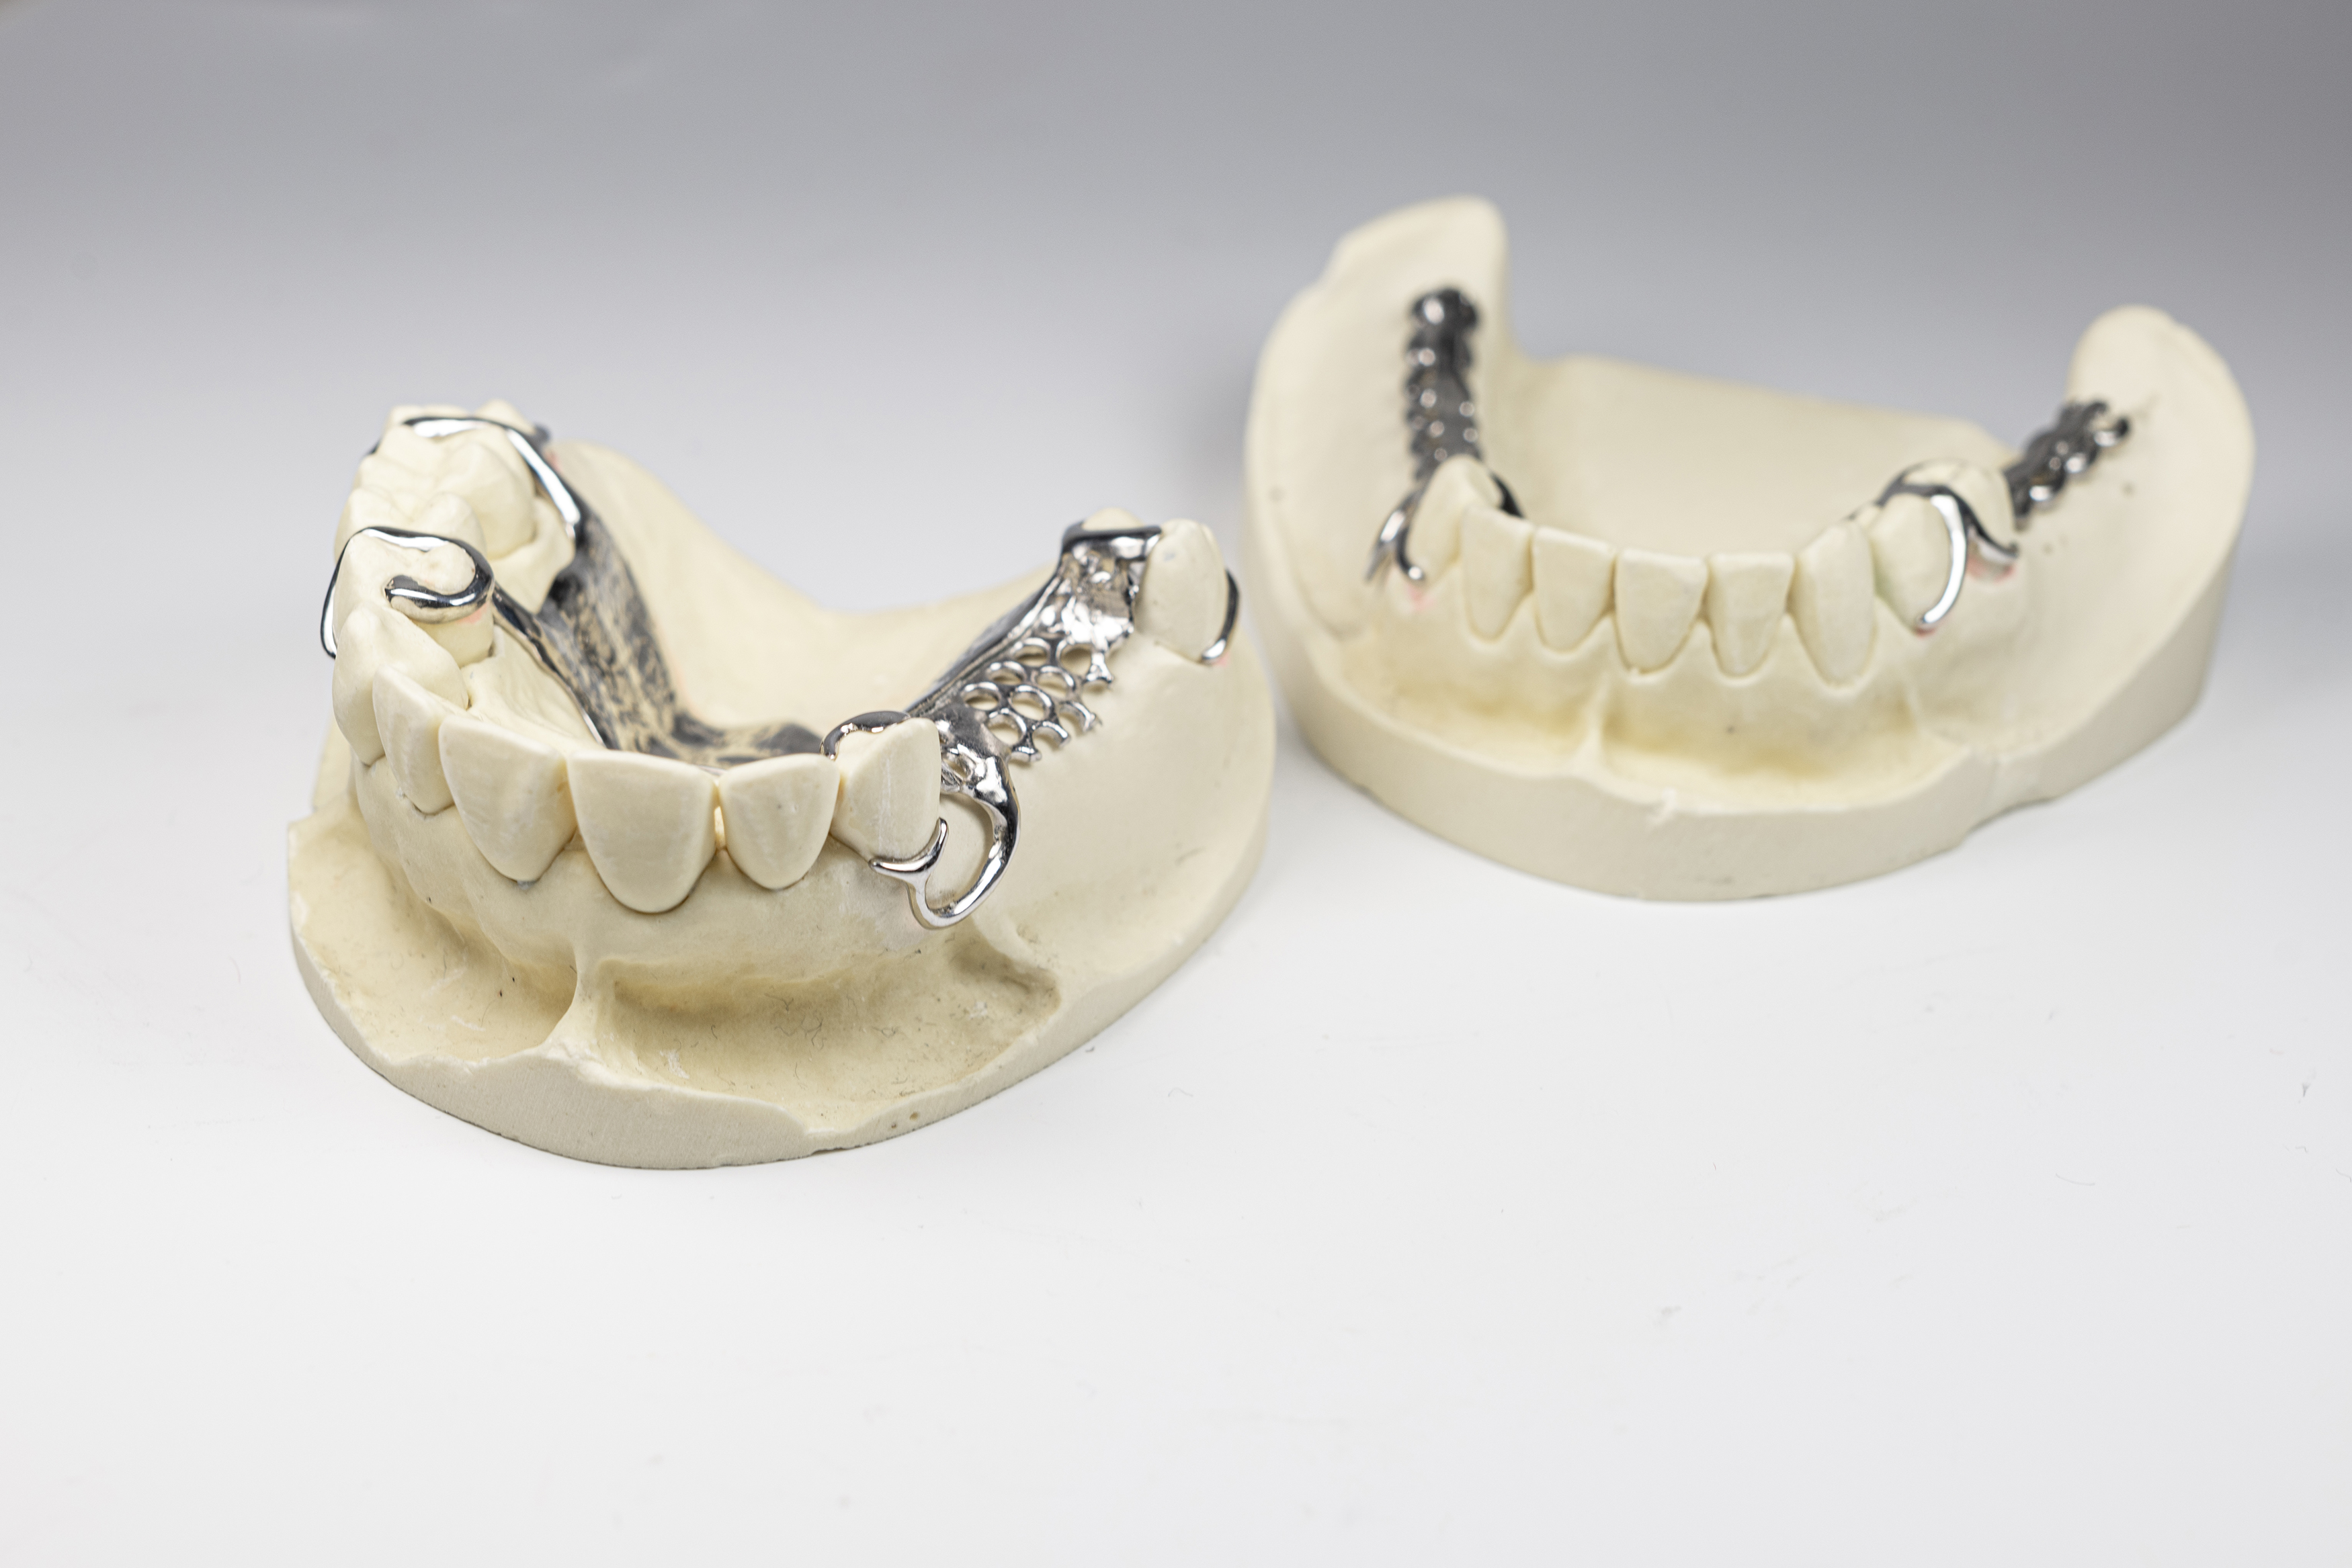 Dental prostheses like these are currently produced by hand in a laborious process. “ATeM” wants to make the production of prostheses faster as well as more comfortable and efficient in terms of costs and resources.